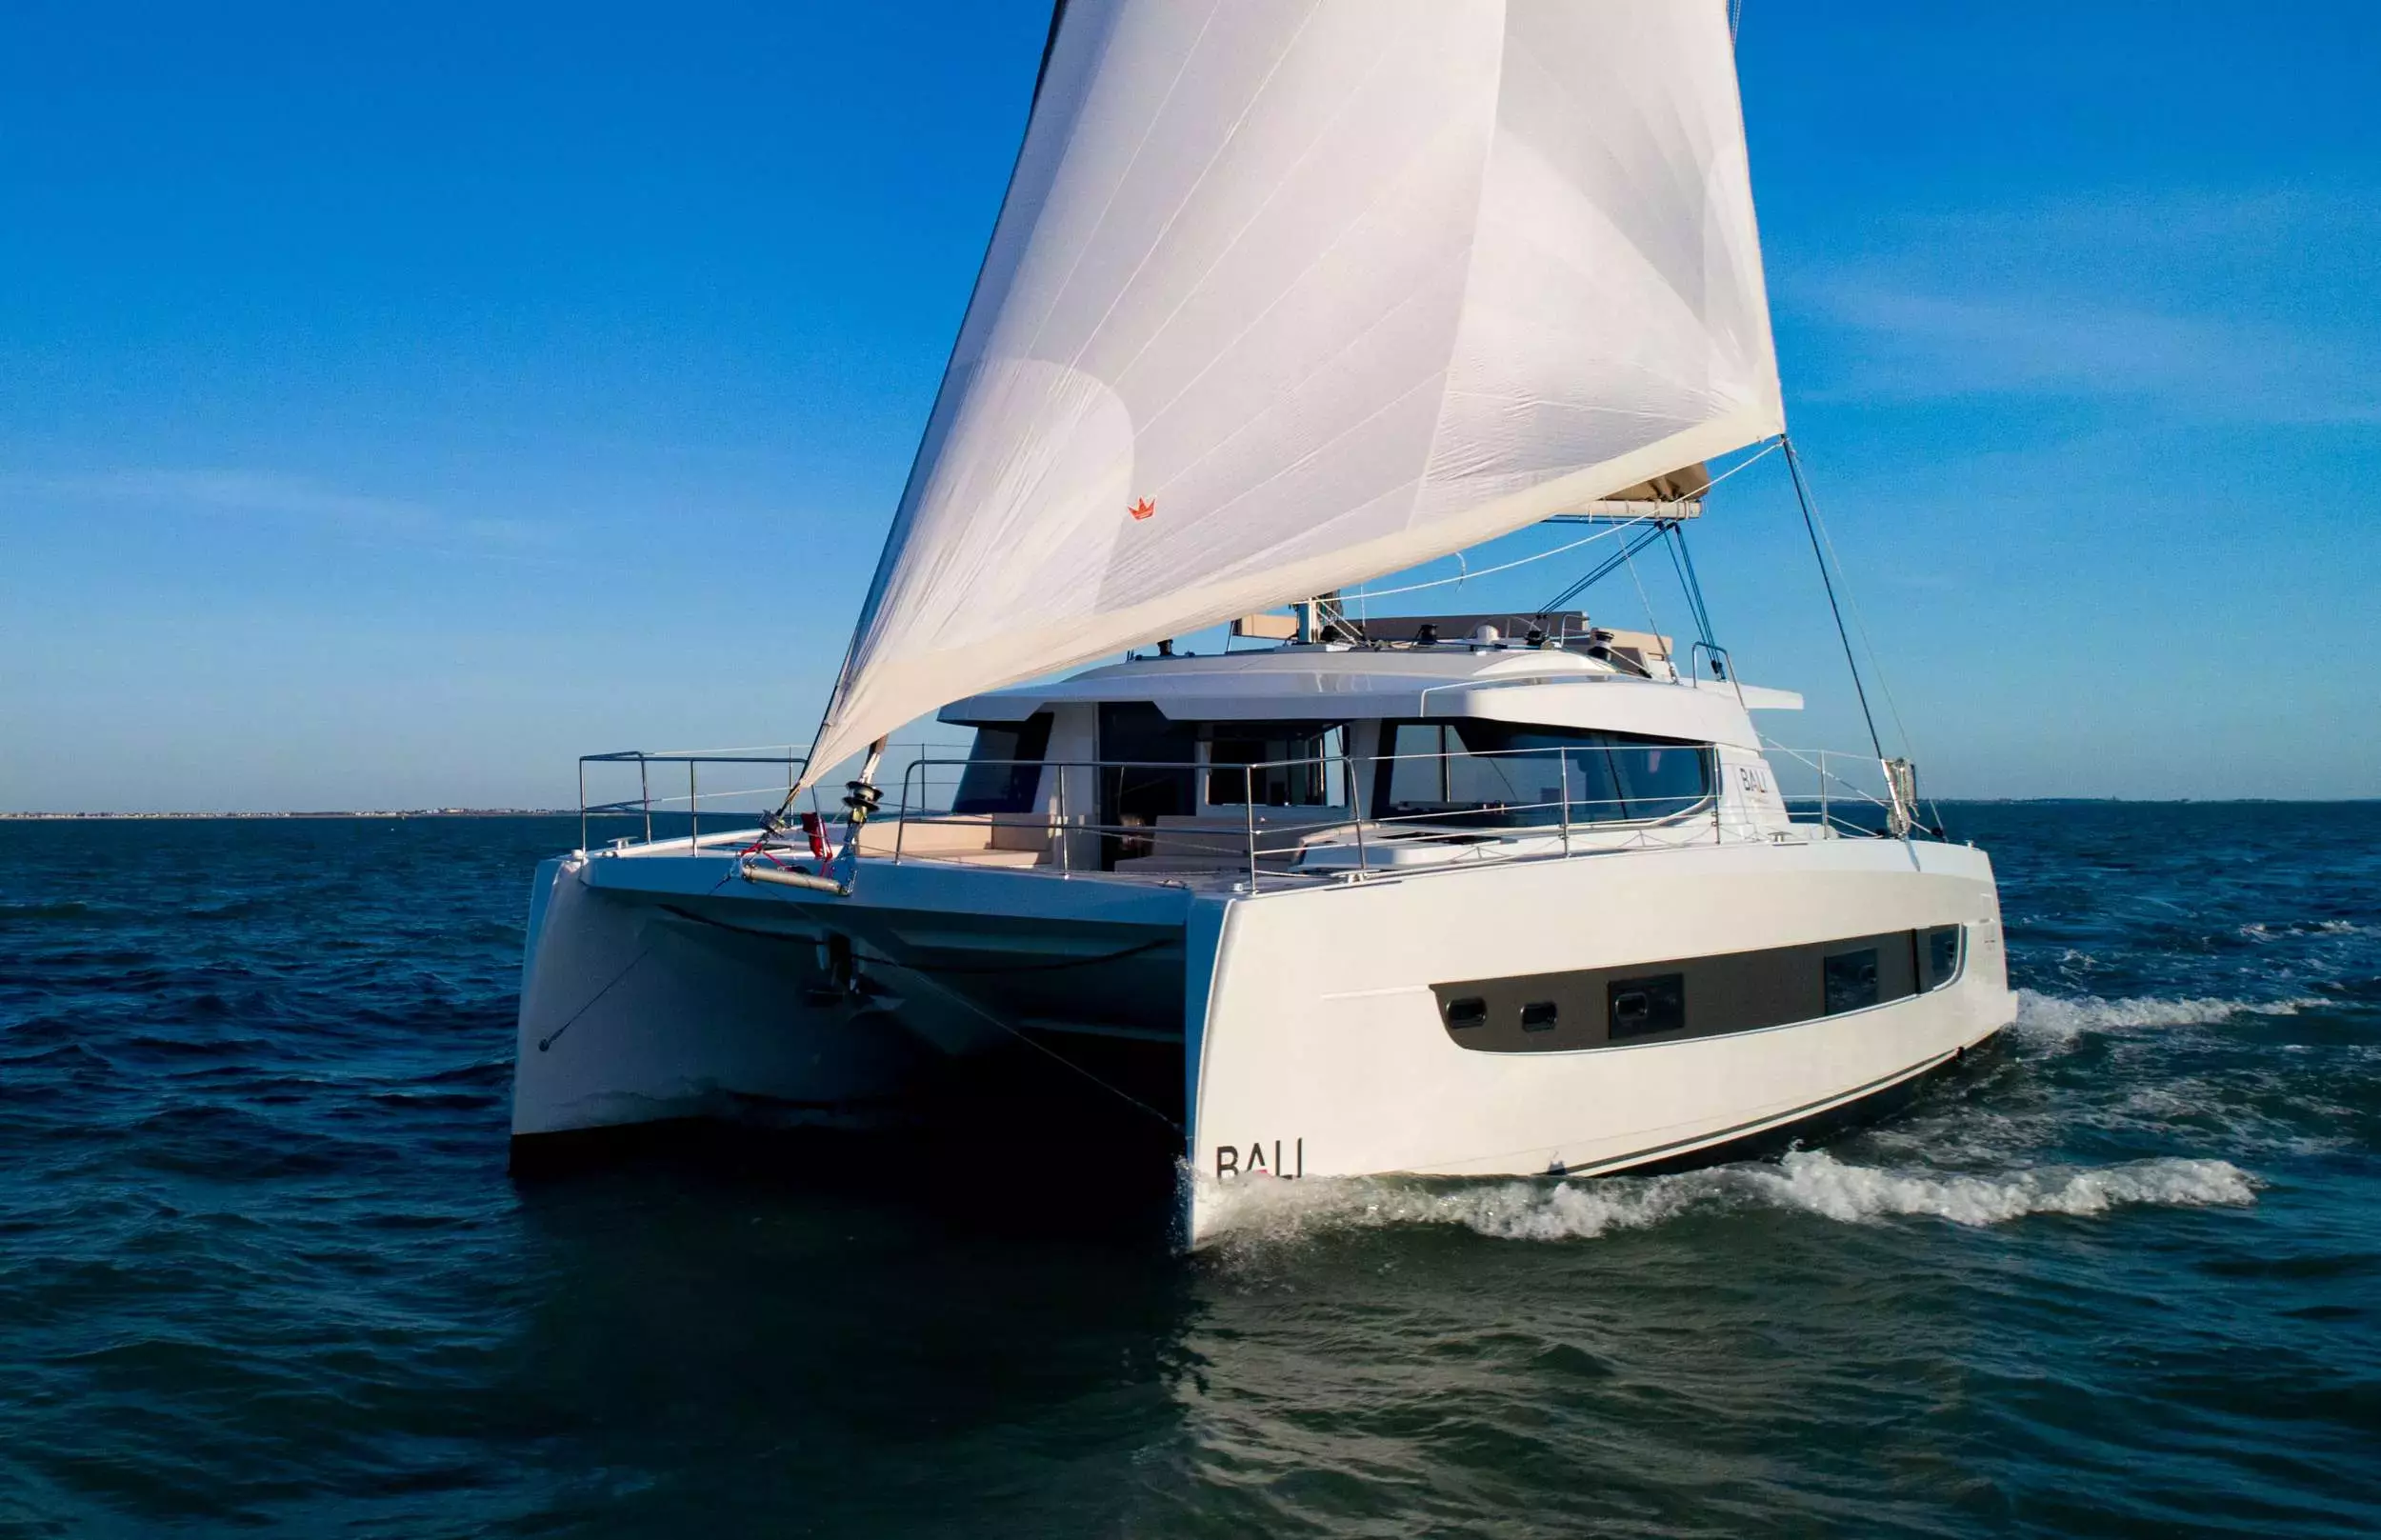 Said by Bali Catamarans - Special Offer for a private Sailing Catamaran Rental in Menorca with a crew